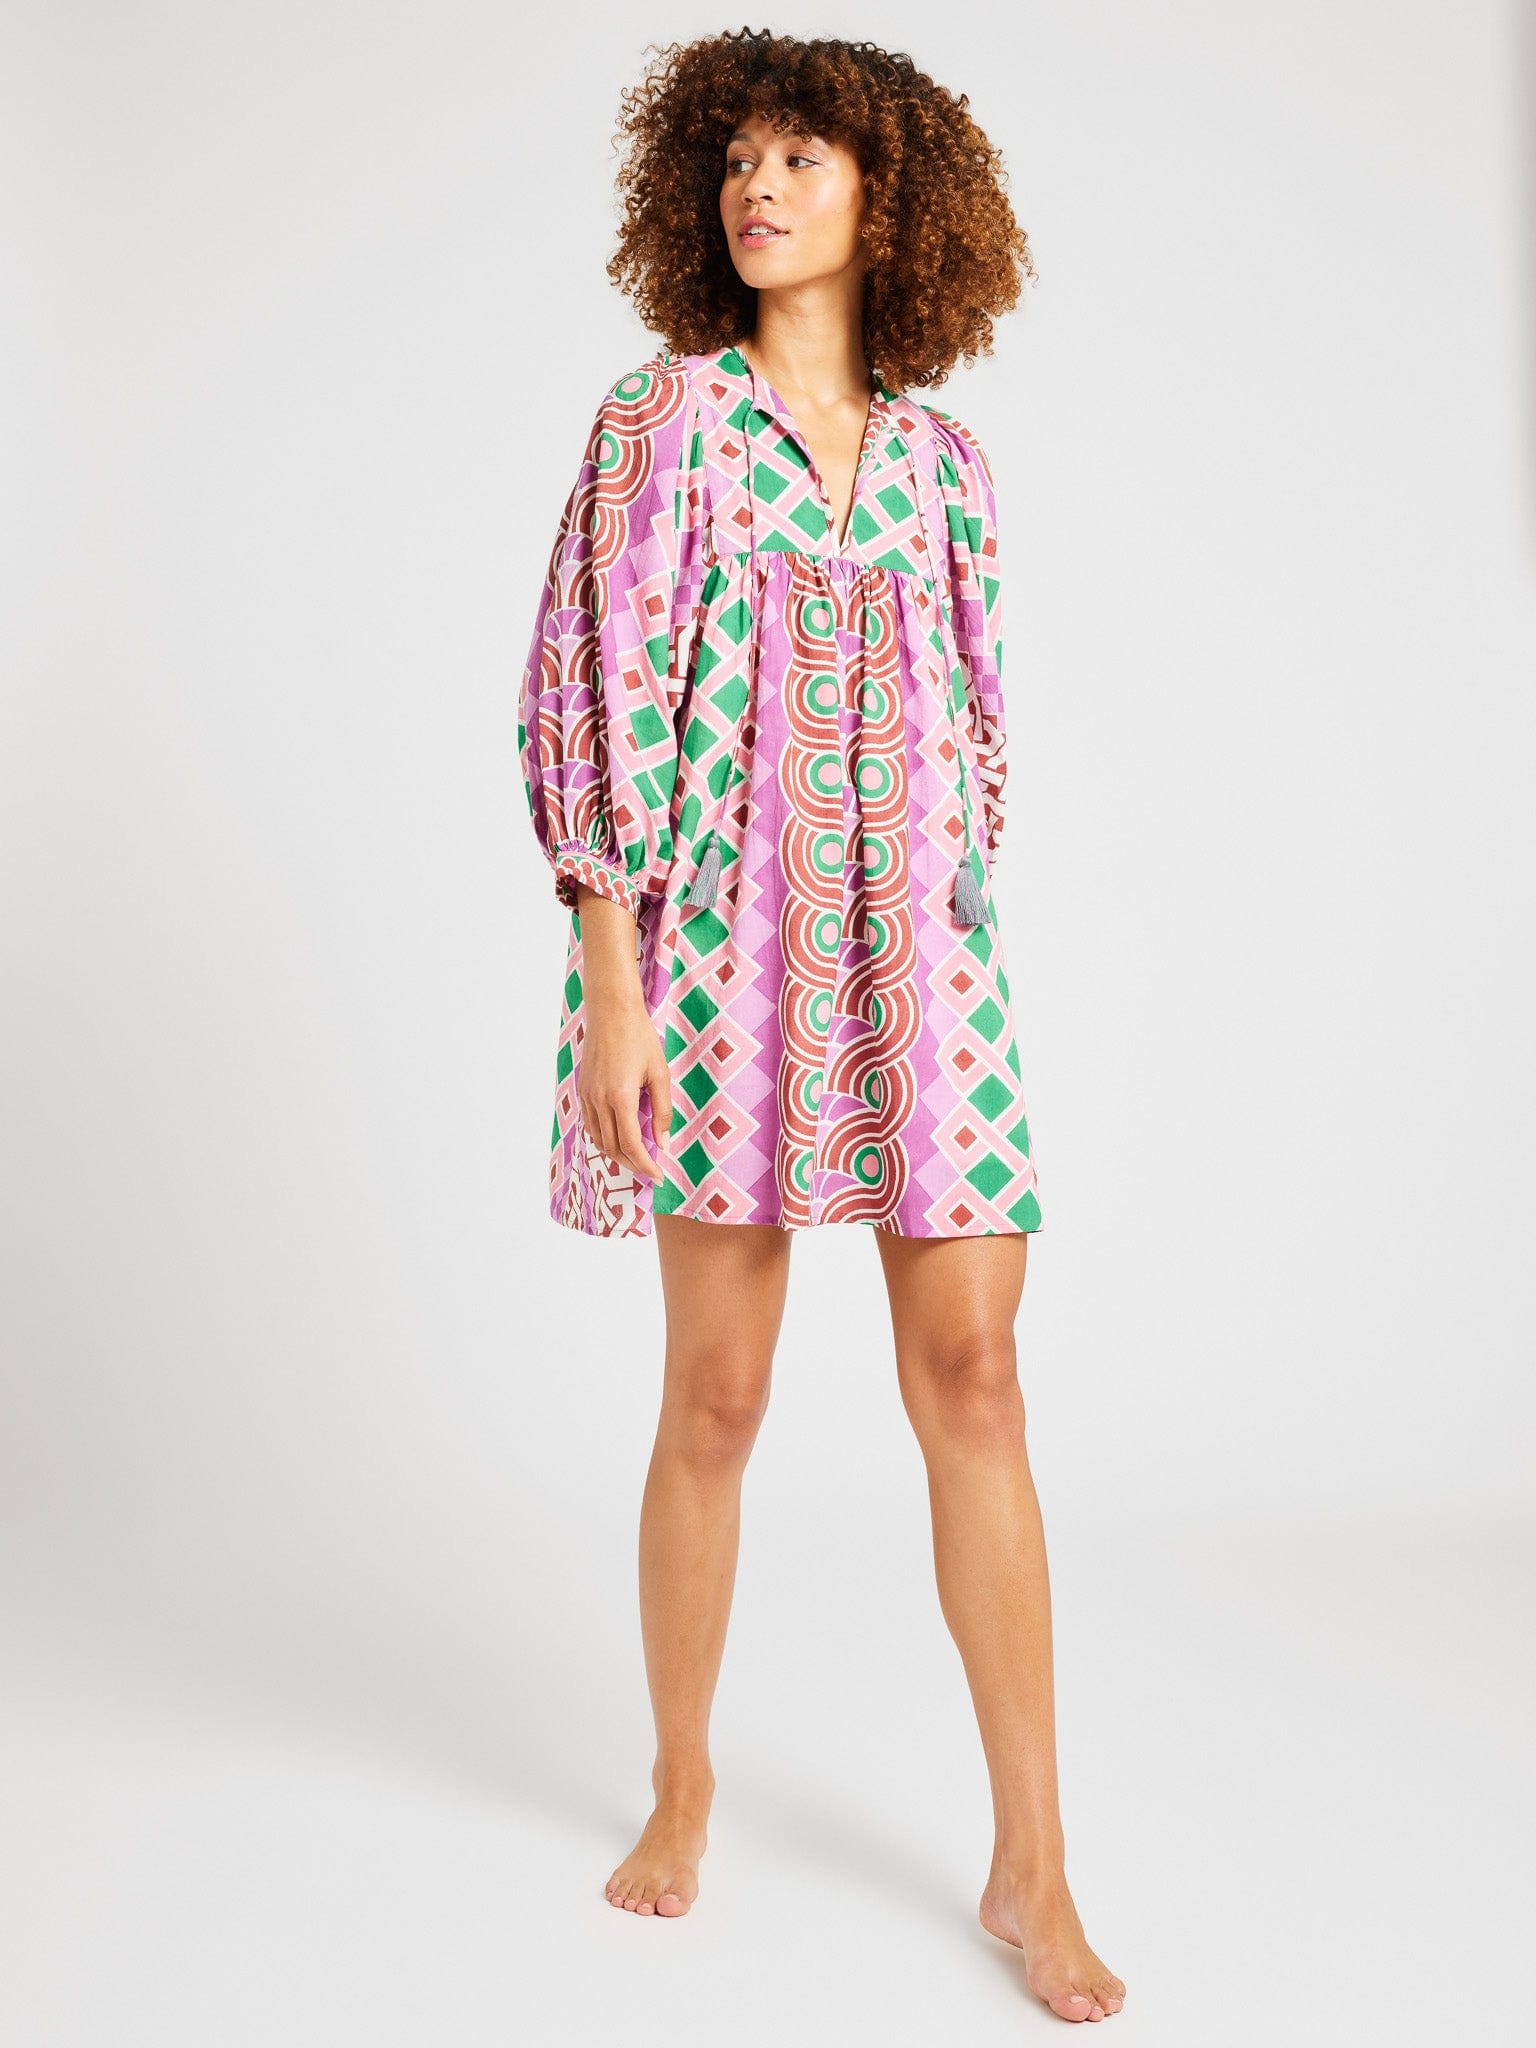 MILLE Clothing Daisy Dress in Casa